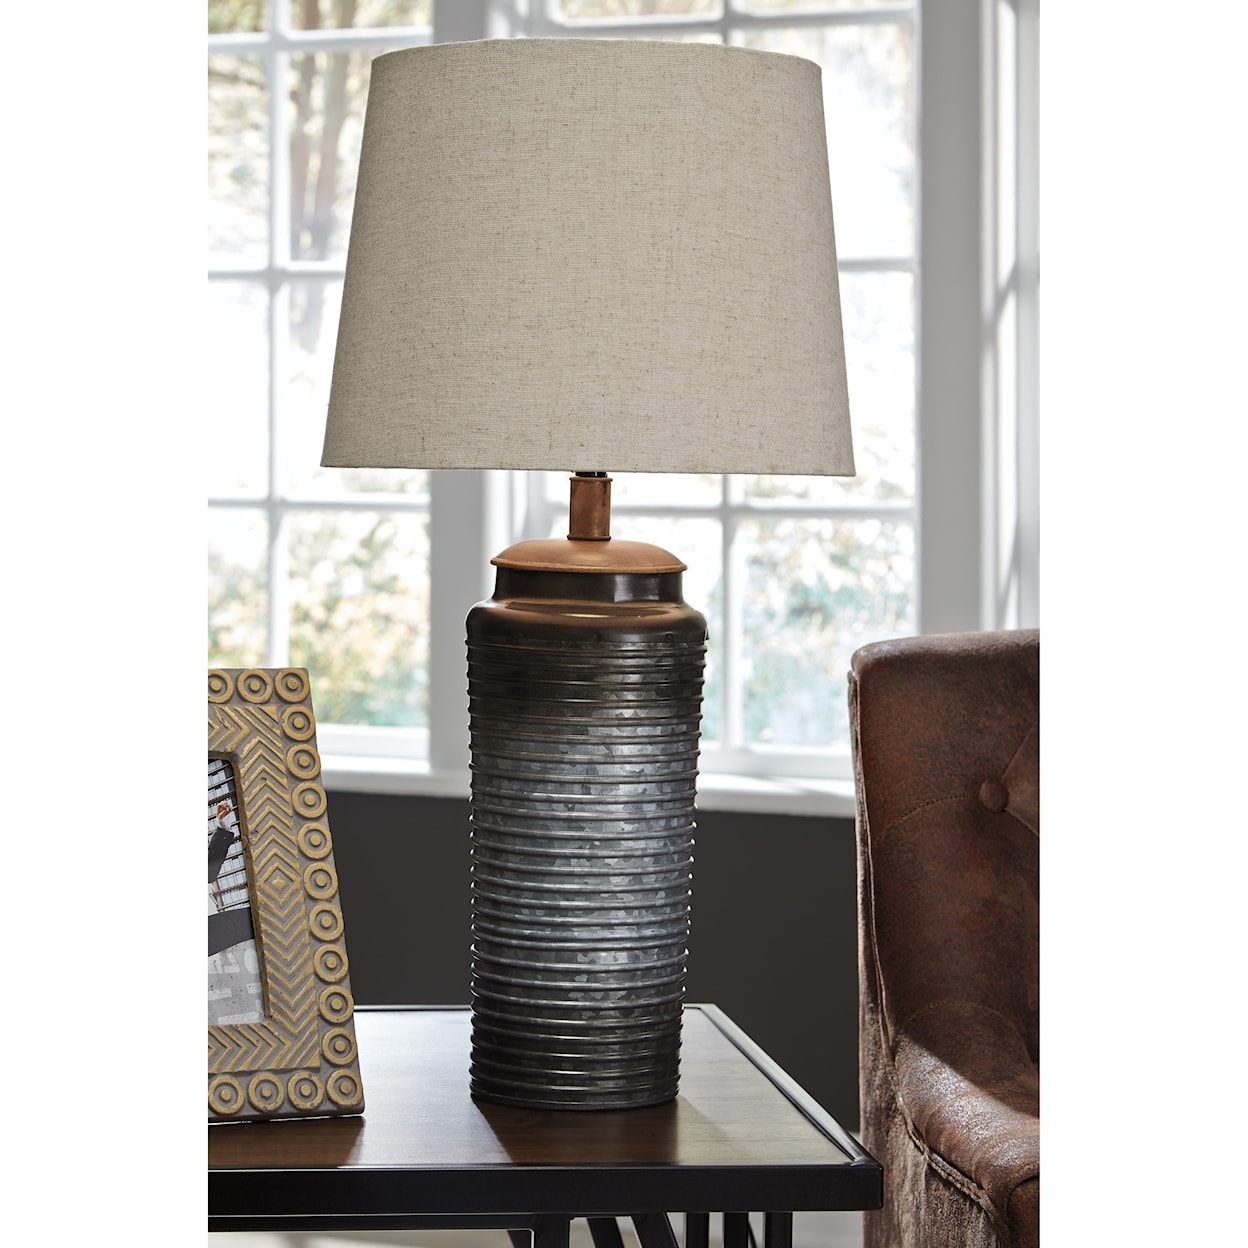 Signature Design by Ashley Lamps - Contemporary Set of 2 Norbert Gray Metal Table Lamps